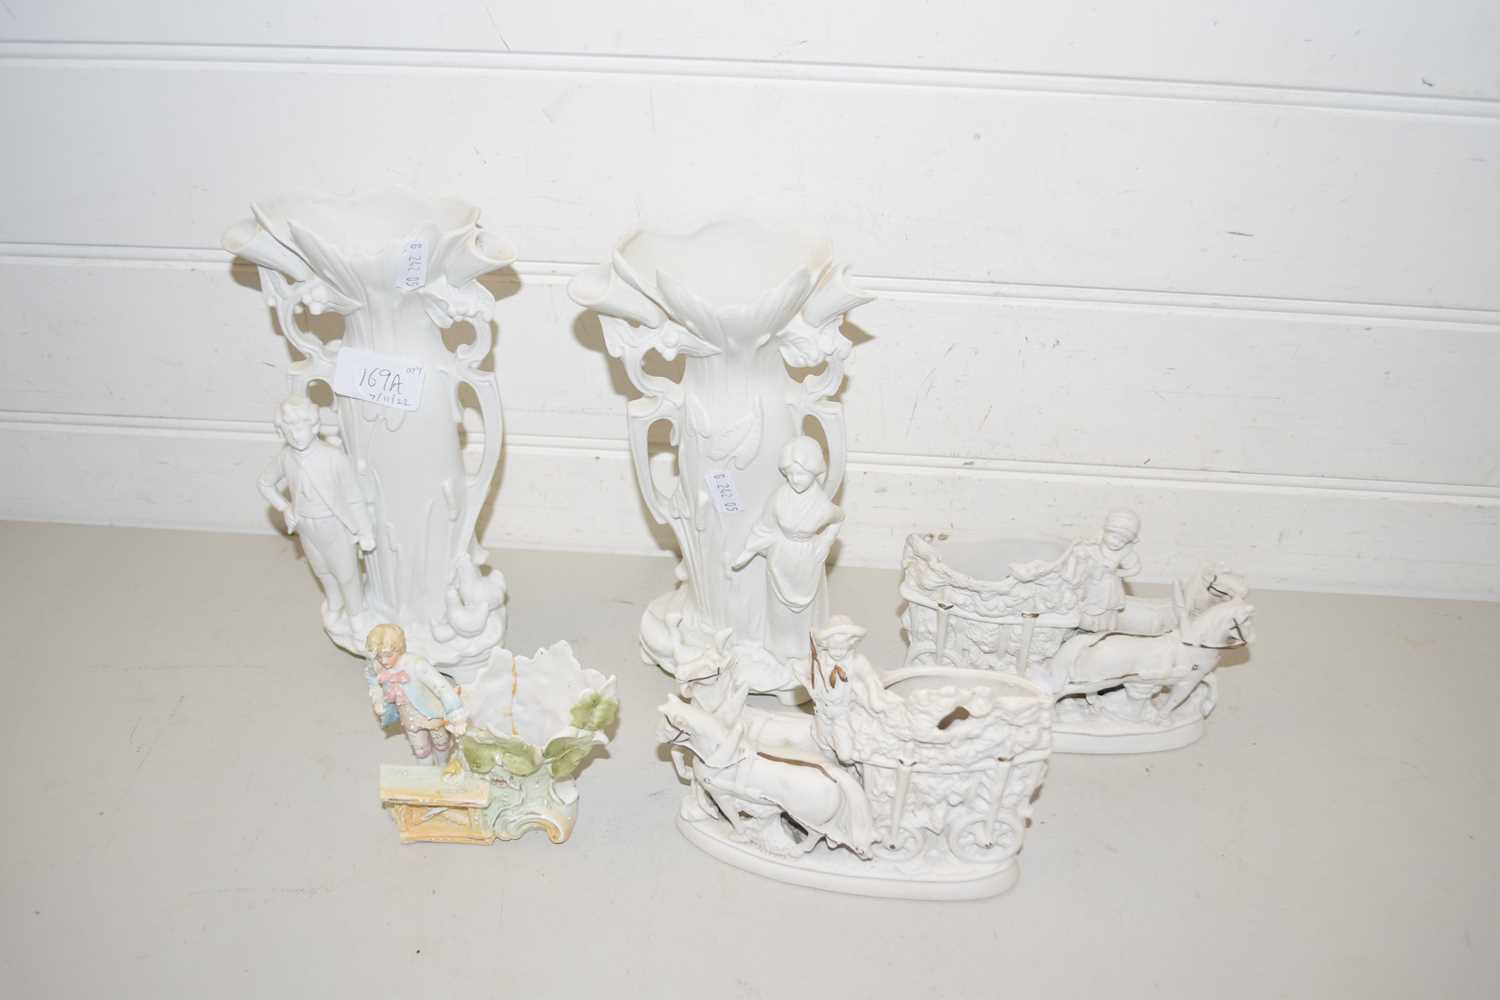 Collection of various white porcelain figural vases